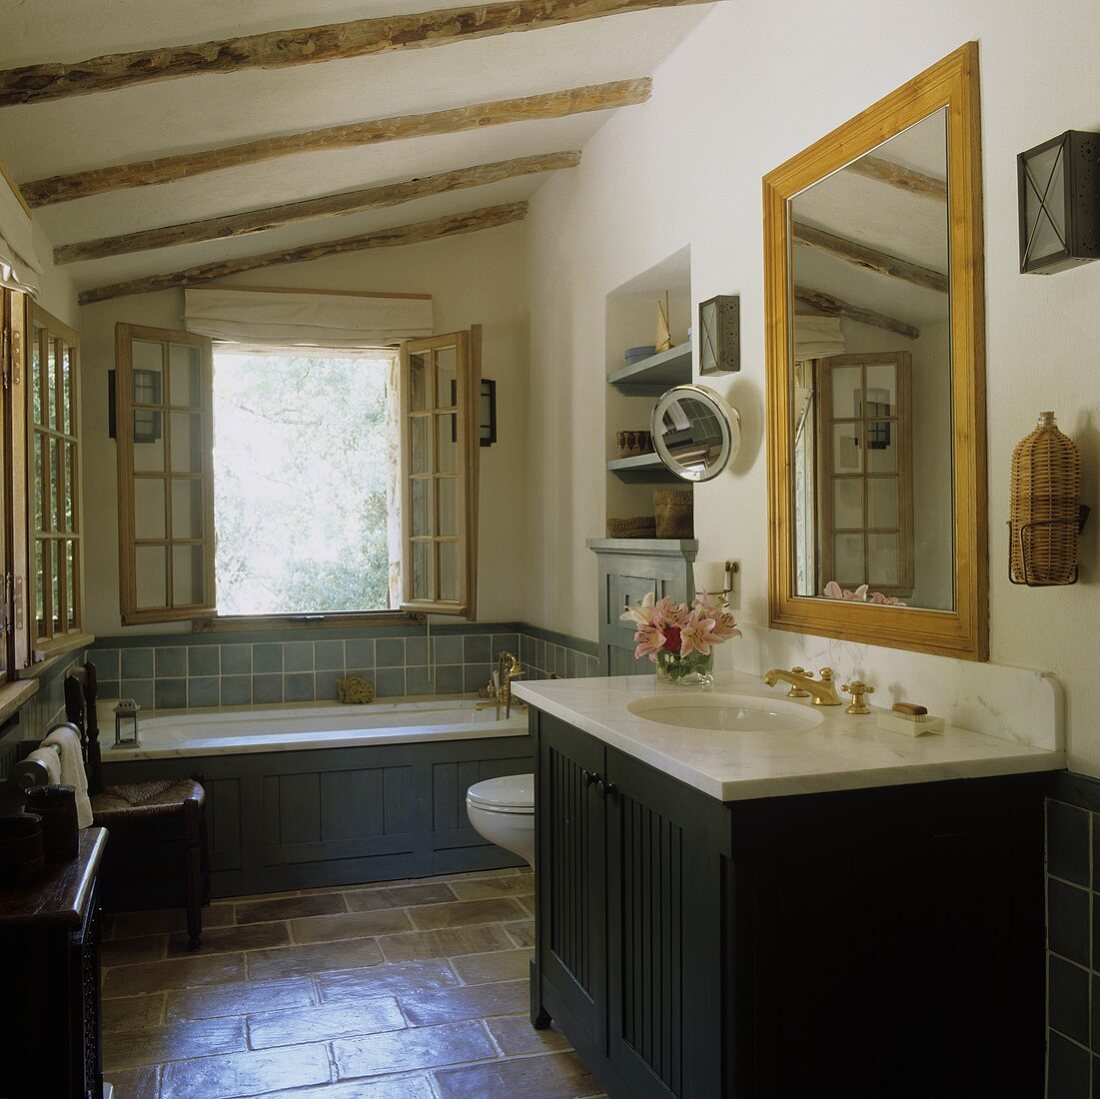 A bathroom in a country house with a terracotta floor - dark wood panelling on a wash basin and a bathtub in front of an open window